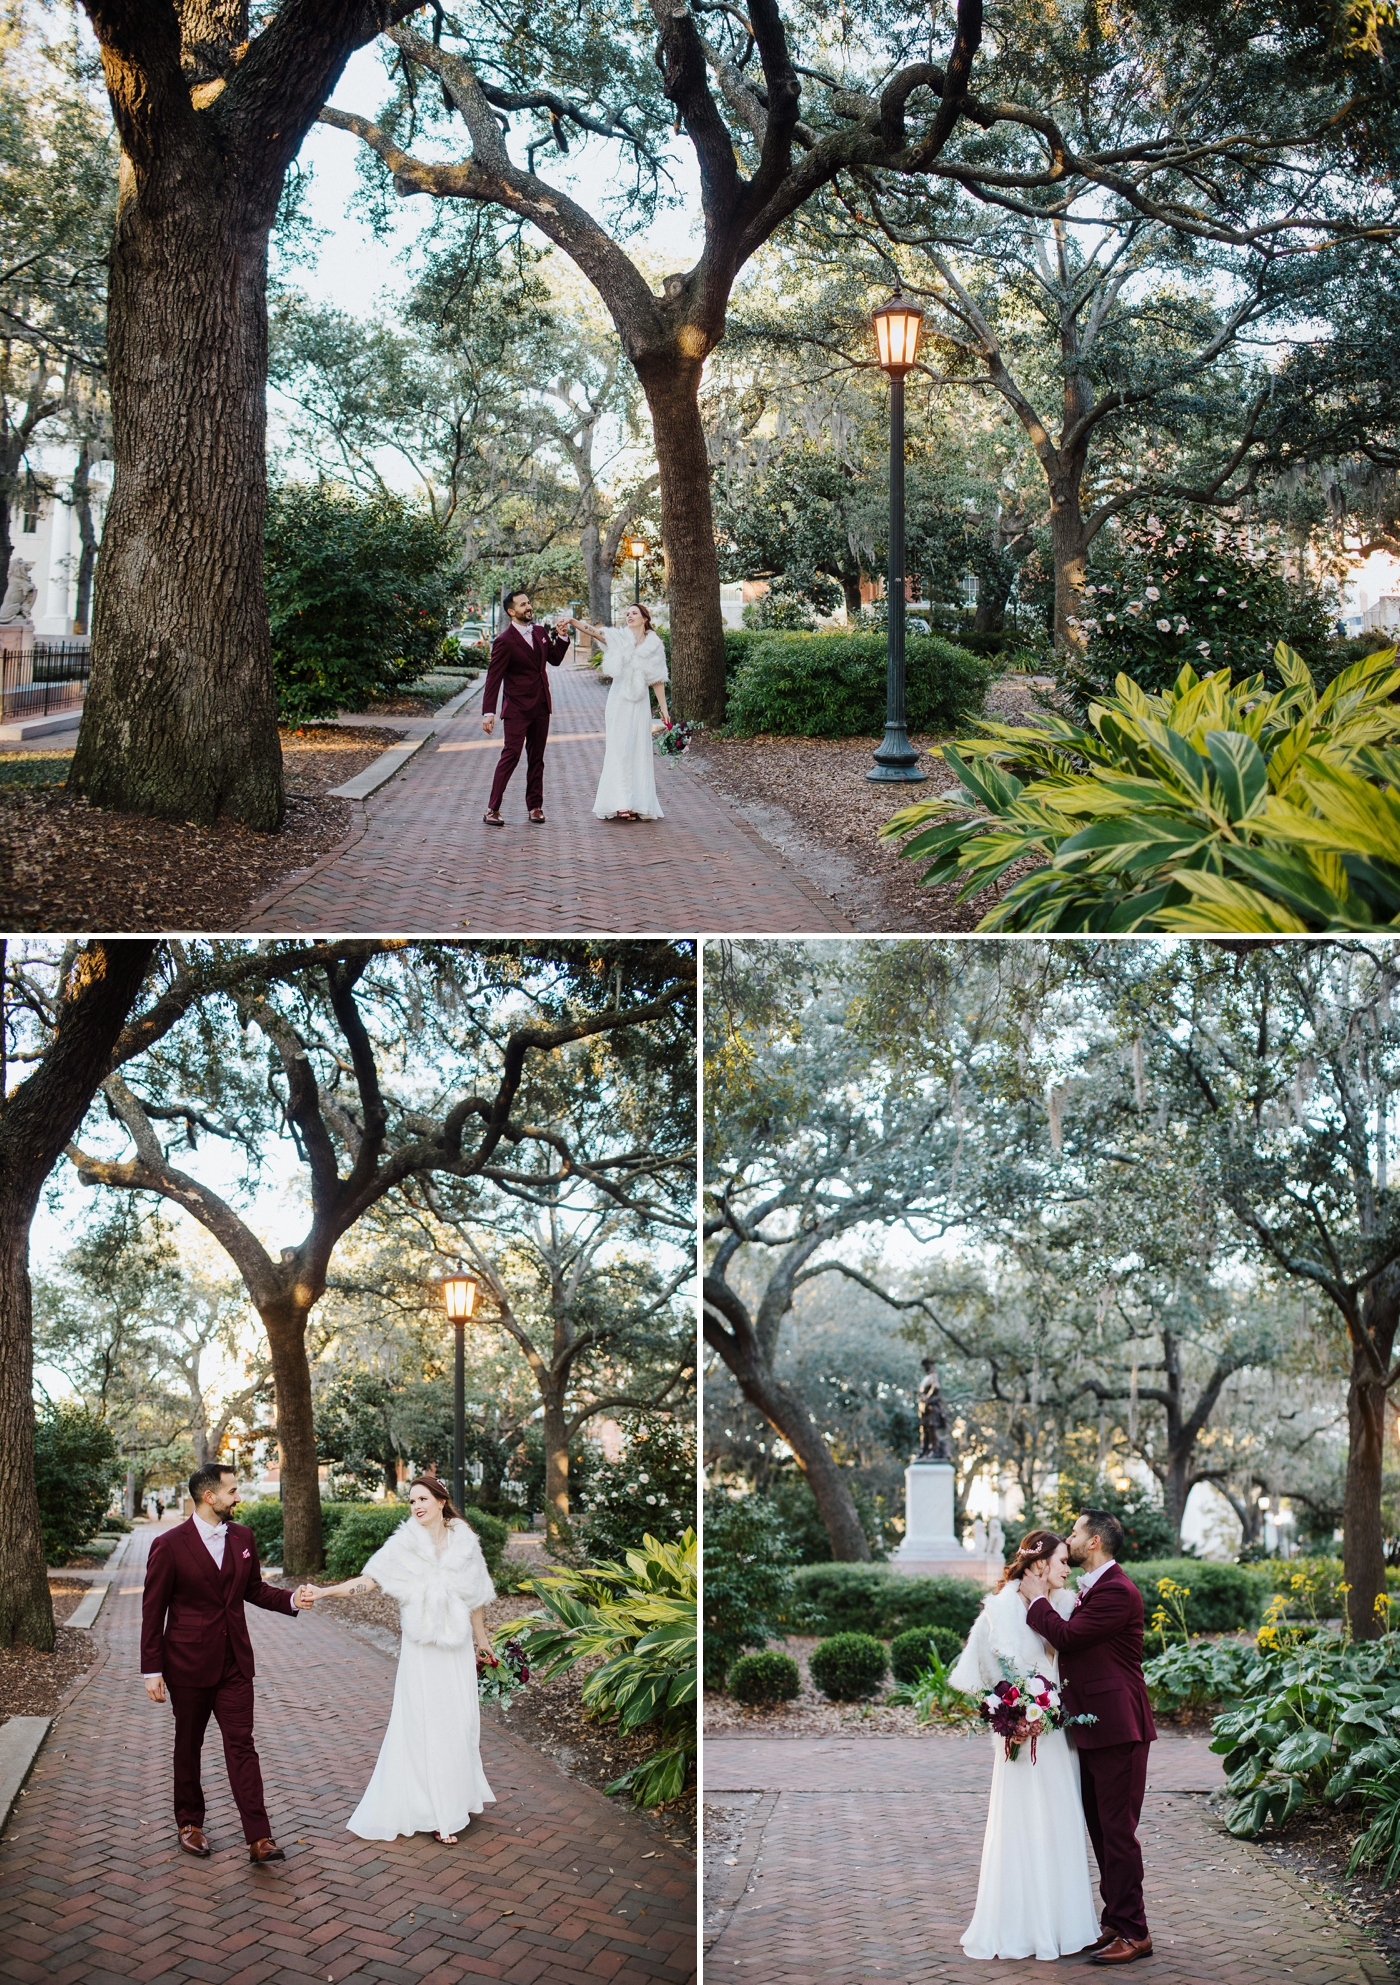 Whitefield Square Elopement by Izzy and Co.